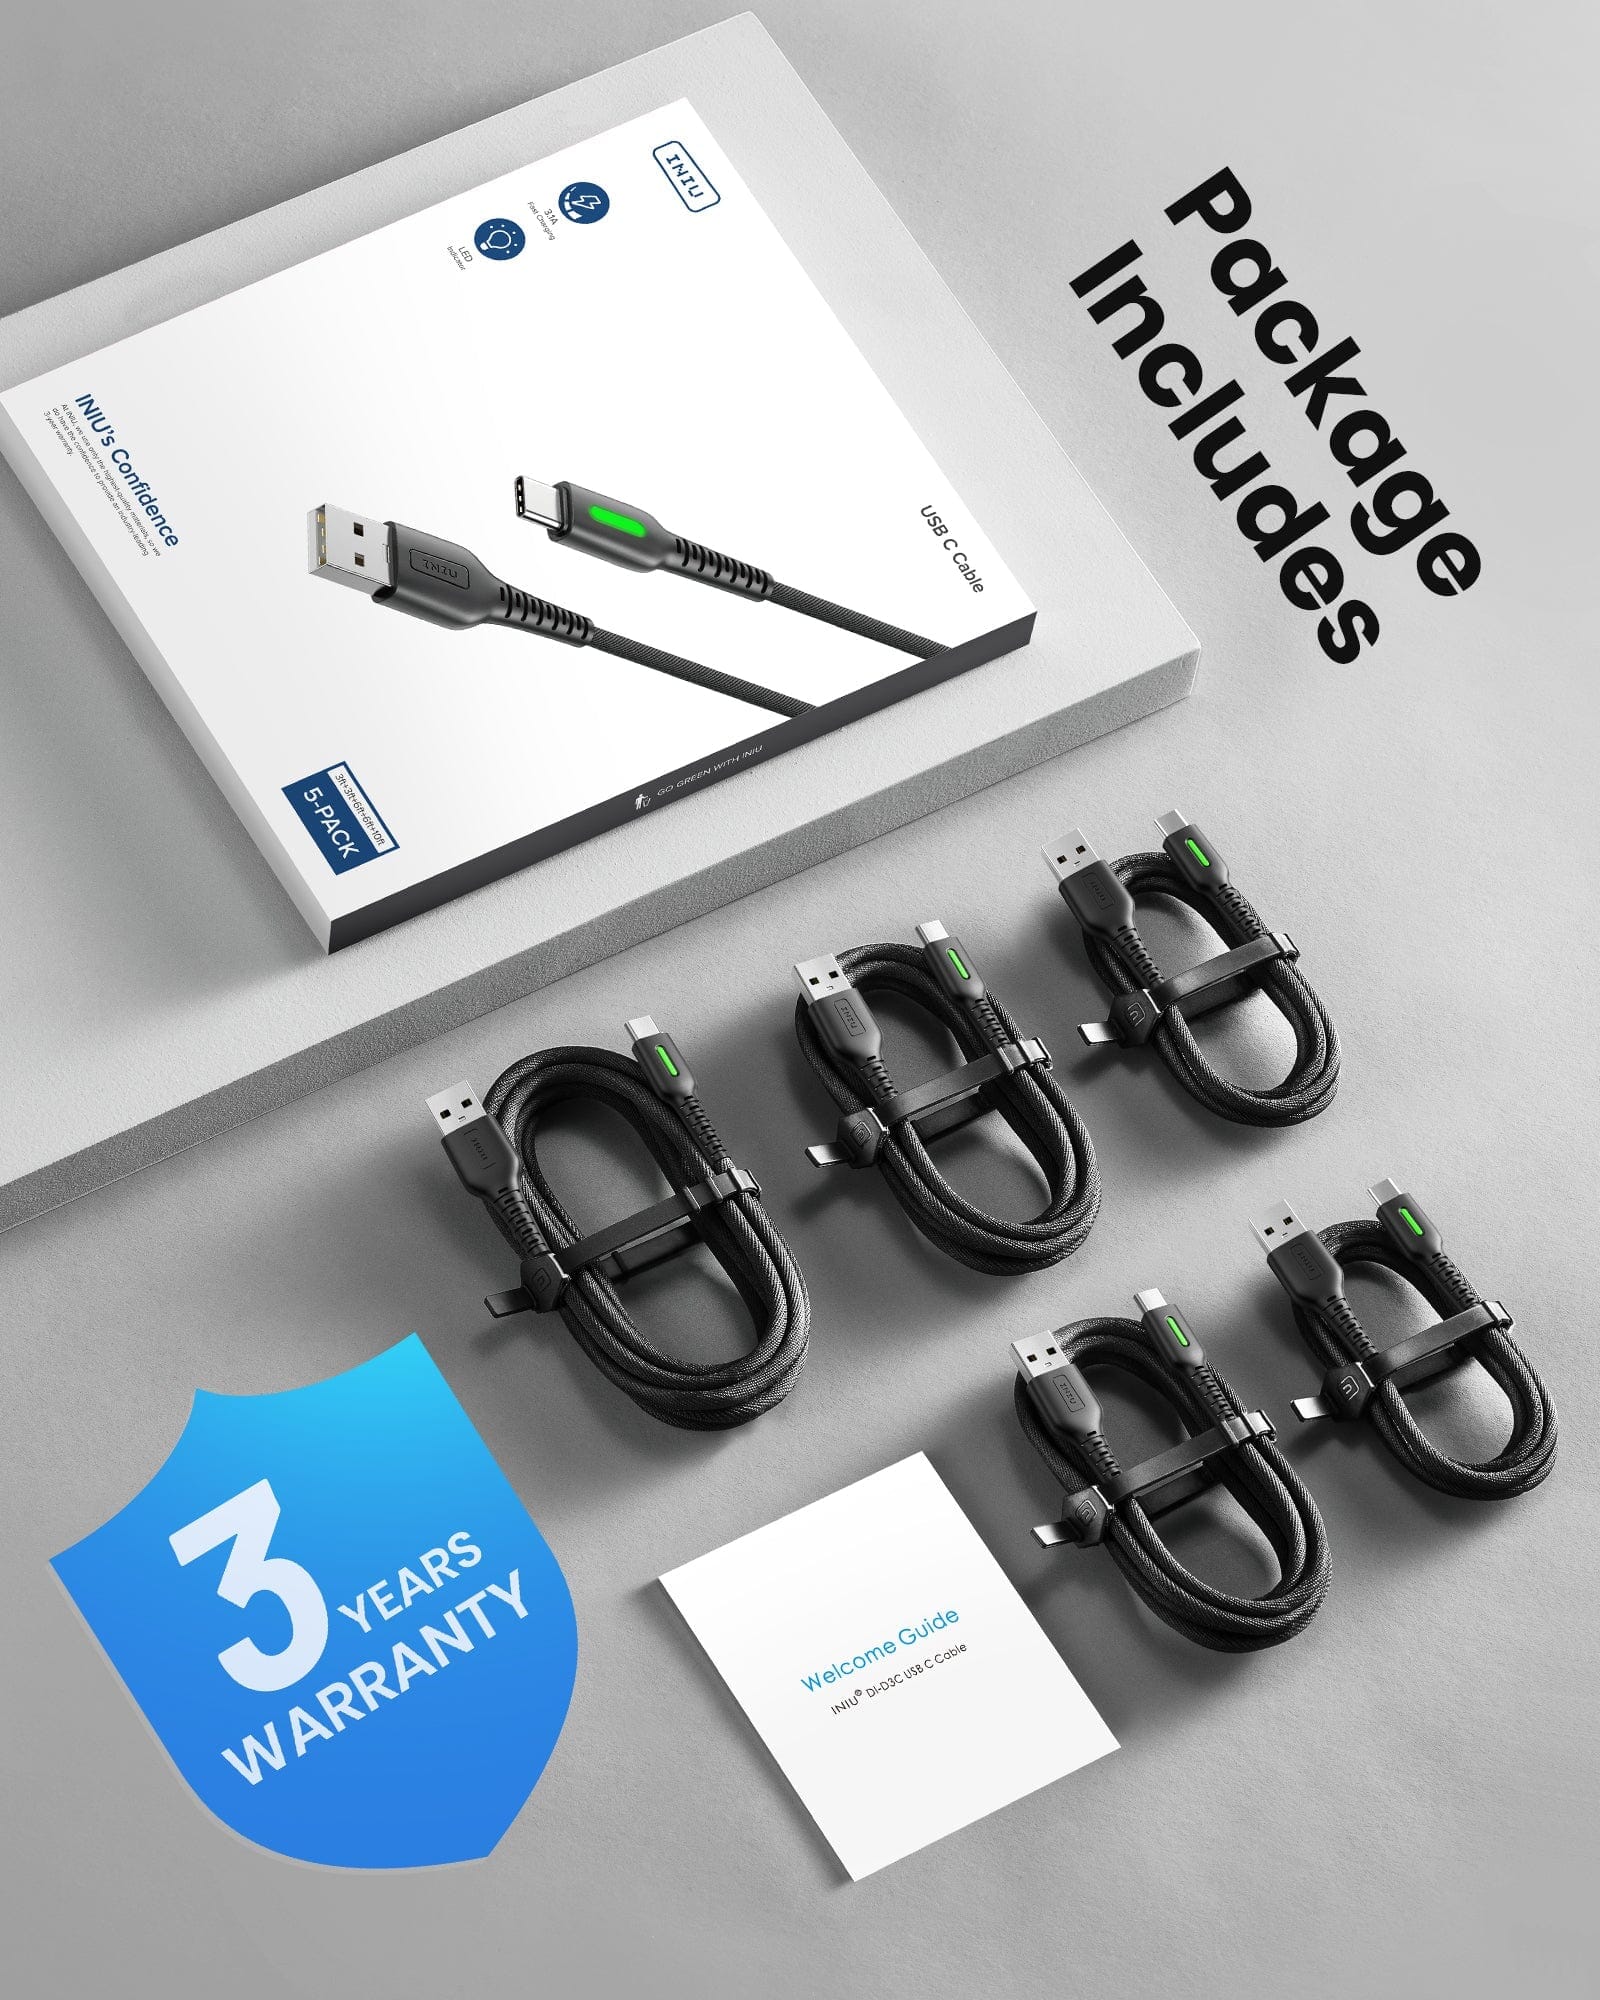 Package Includes: INIU Swoosh 3.1A QC USB C Braided Cables 5 Pack 【3.3ft+3.3ft+6ft+6ft+10ft], 3 years Warranty